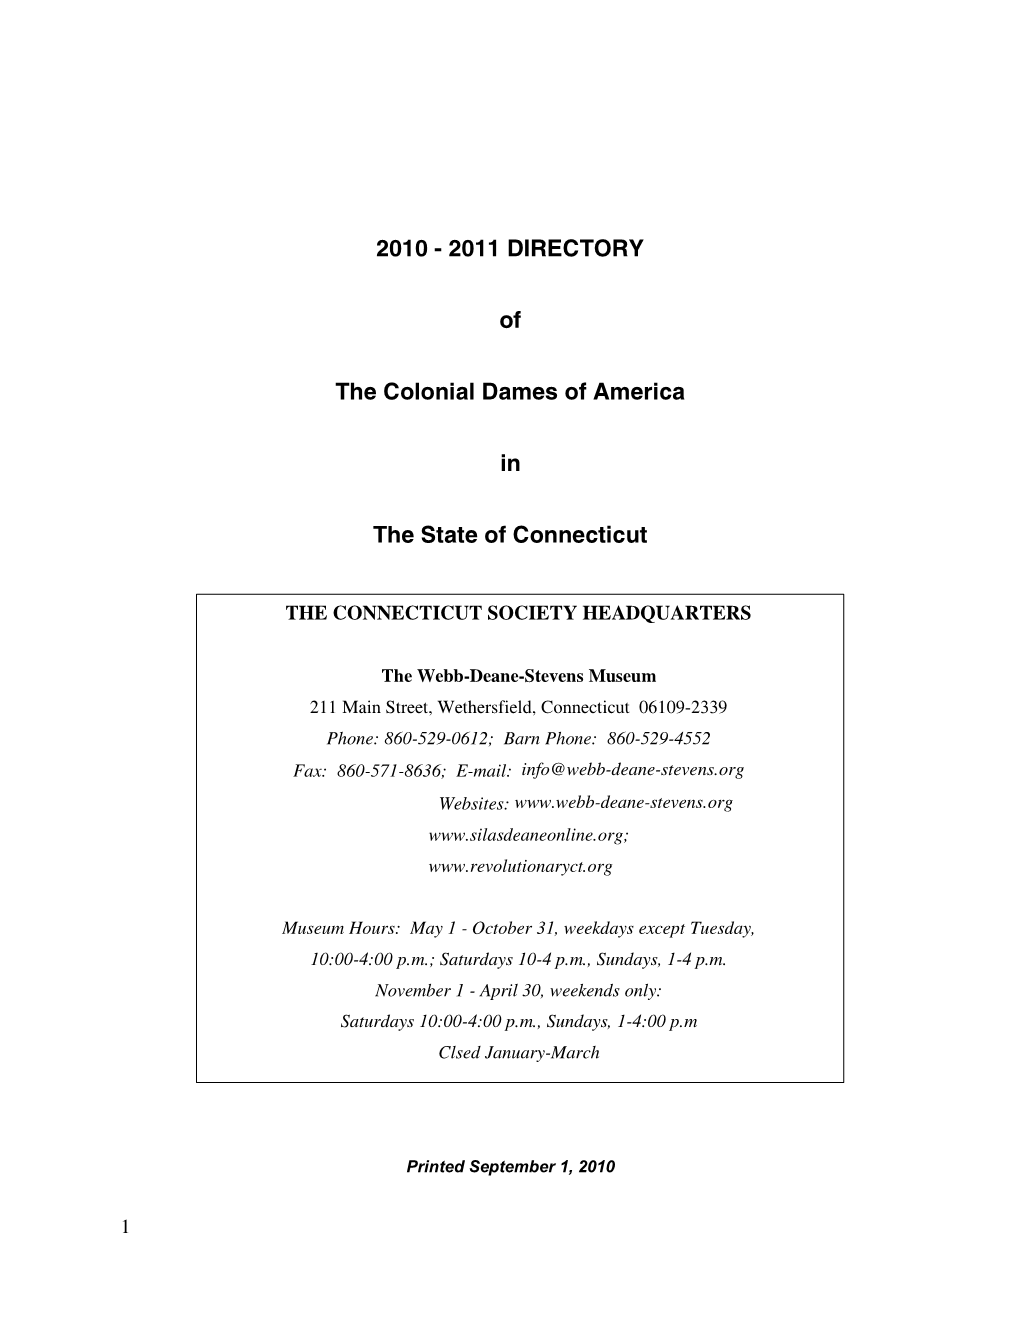 2011 DIRECTORY of the Colonial Dames of America in the State Of